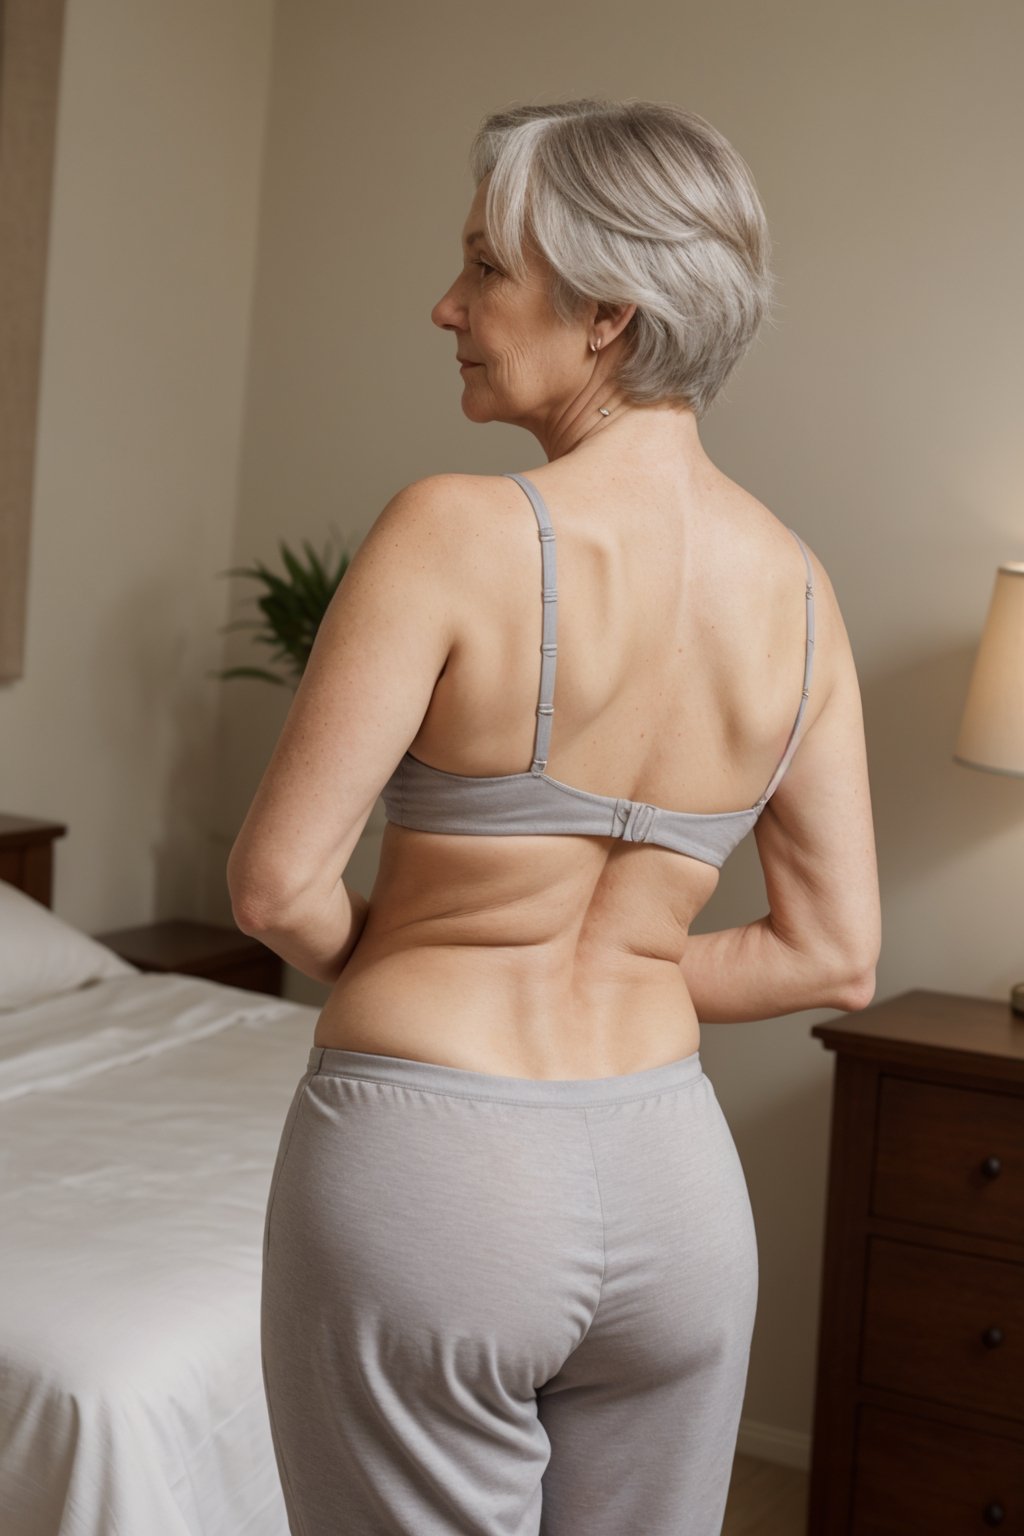 masterpiece, (((older woman in her 50s))), grey hair, wearing nighty, medium saggy breasts, slightly chubby, lateral posture, soft smile, bedroom, standing, seductive_expression, slight cleavage, freckles, full-body_portrait, back_view